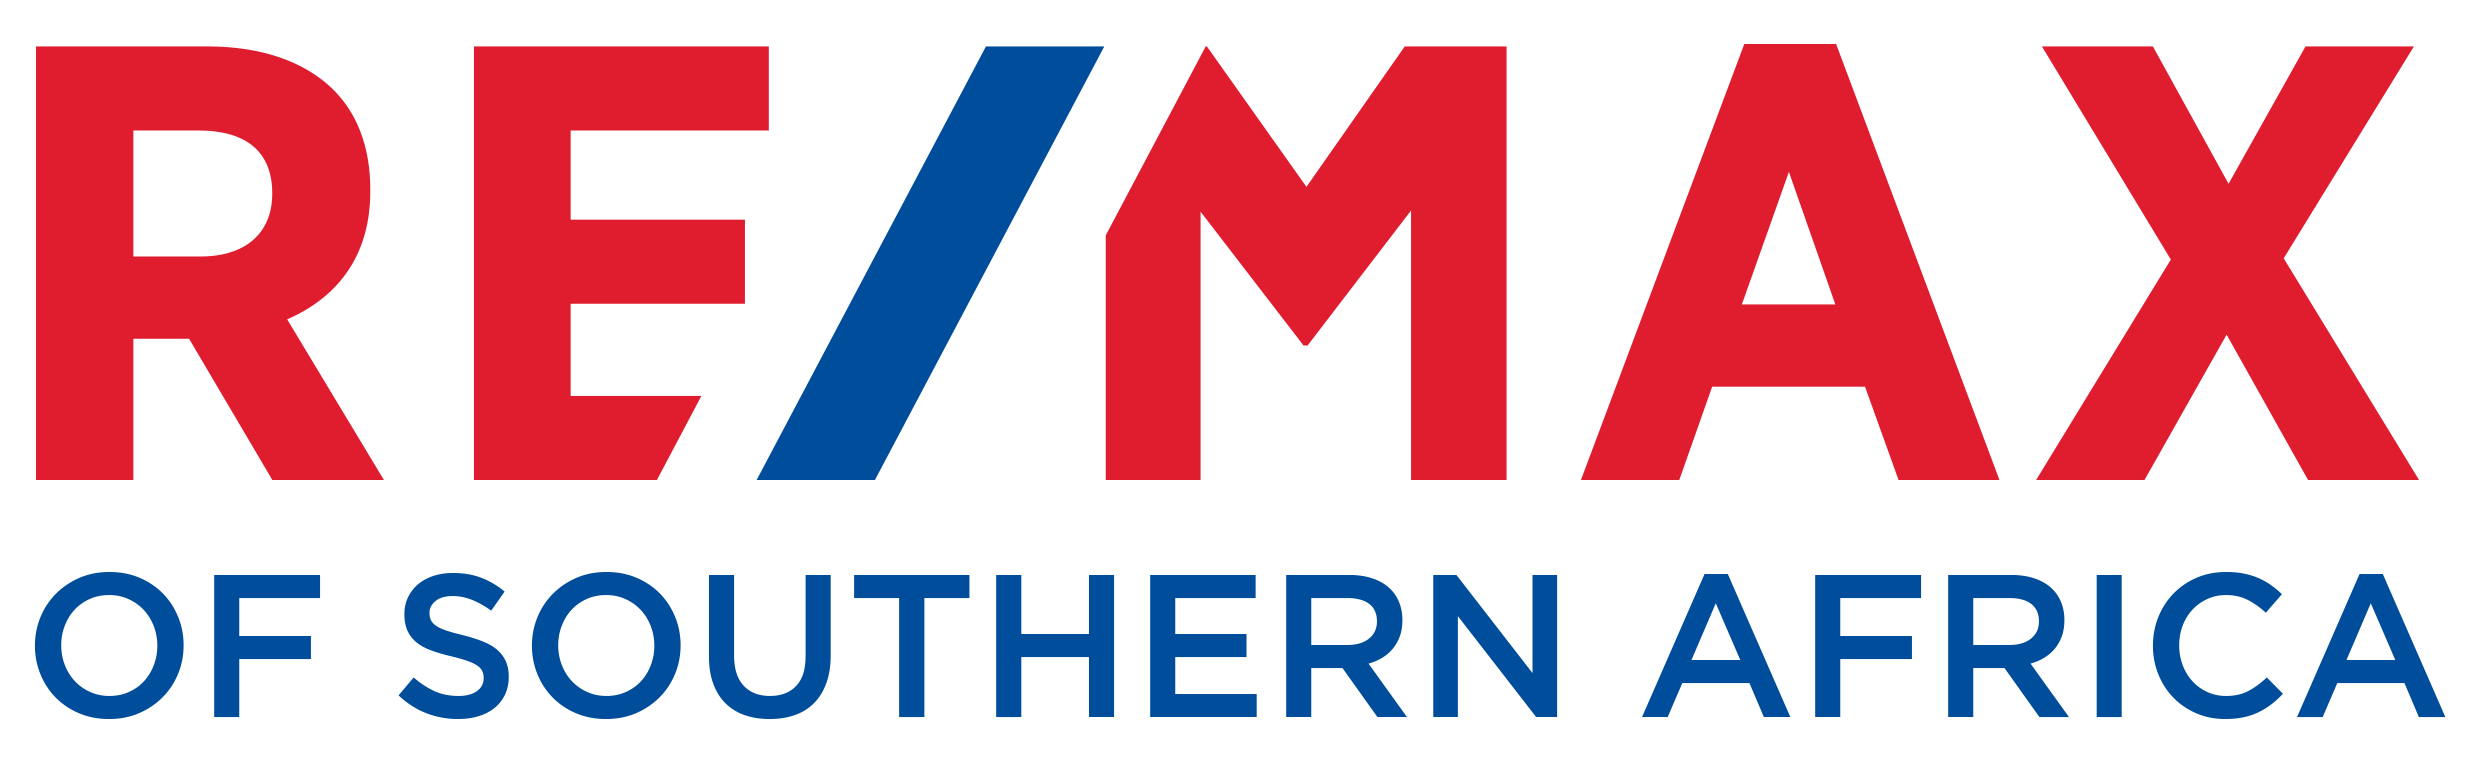 Remax.com Logo - RE/MAX of Southern Africa